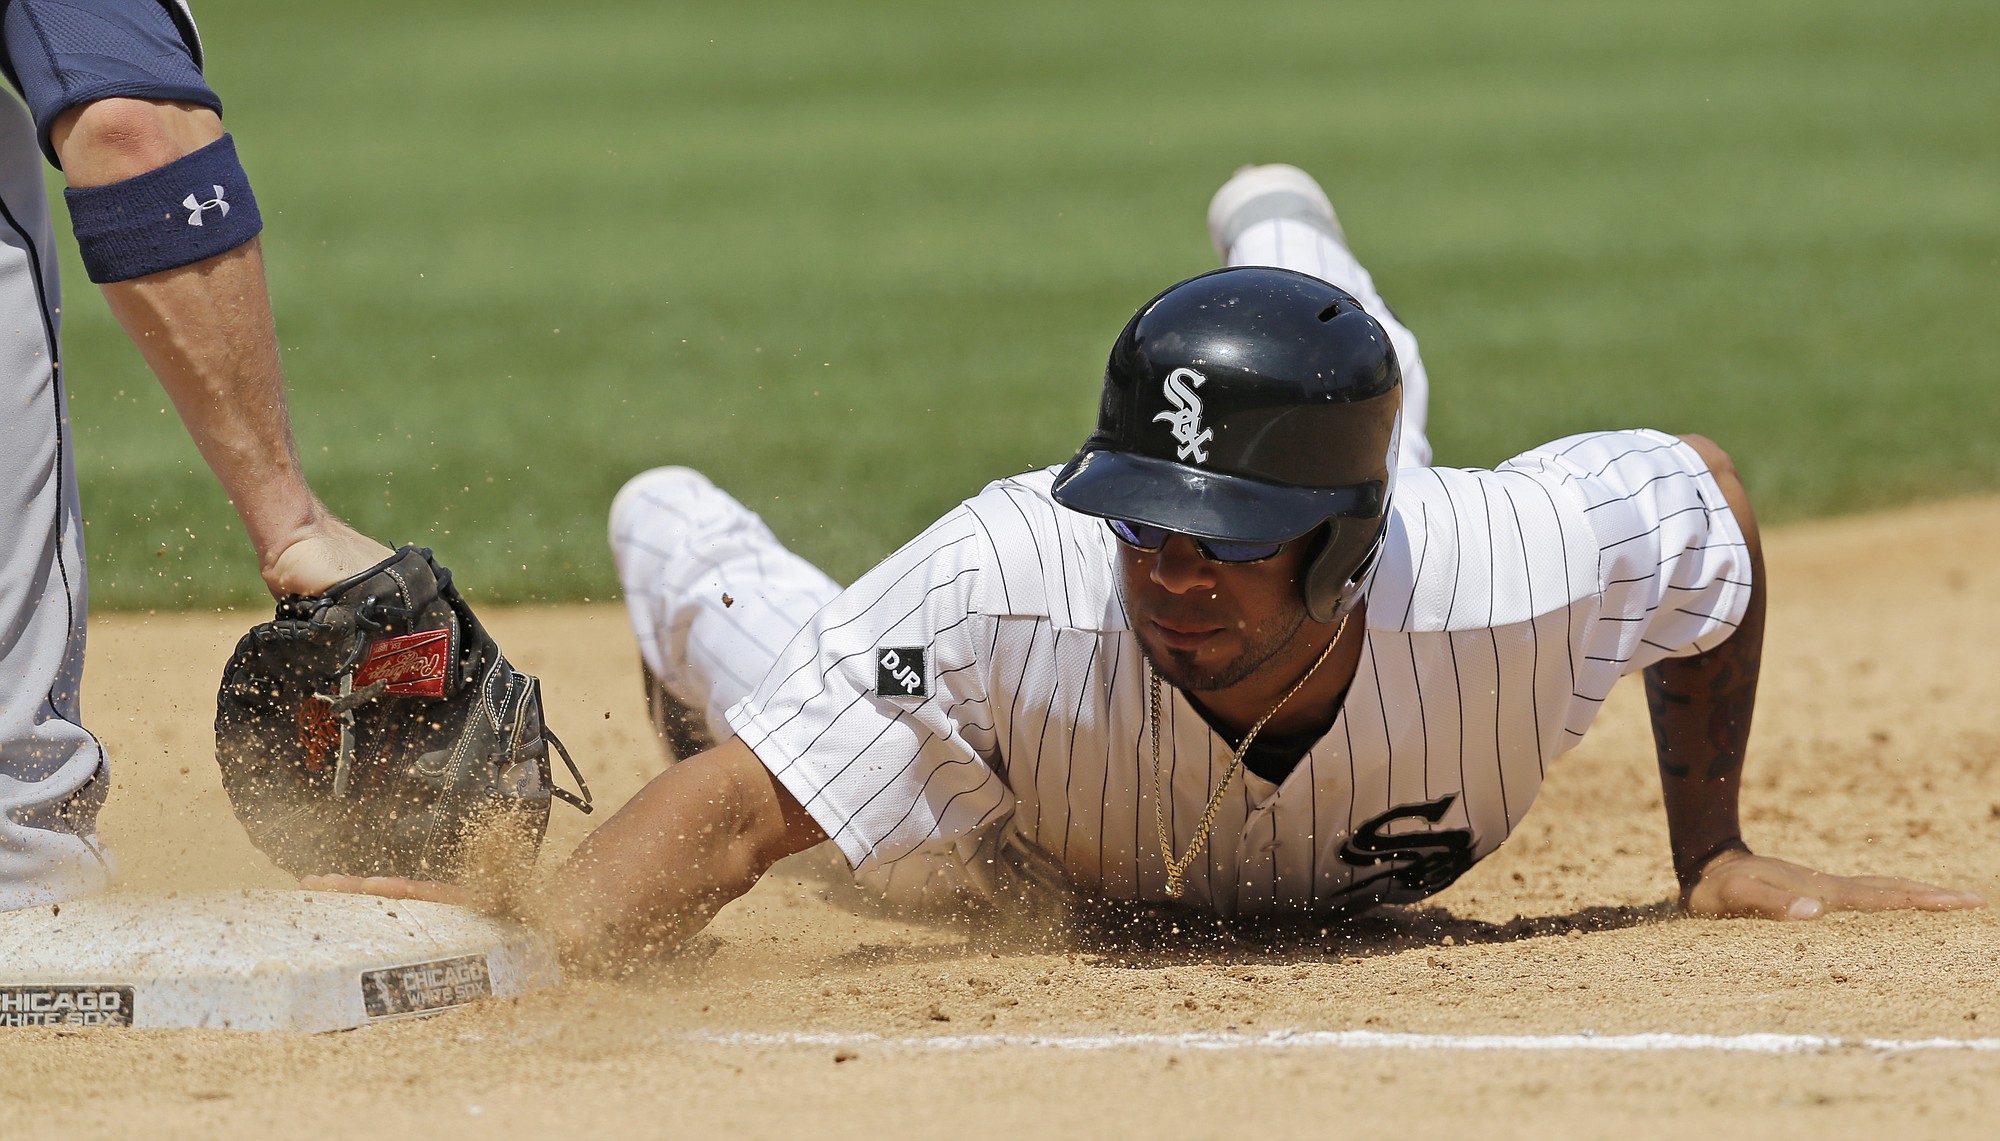 Chicago White Sox's Leury Garcia dives back to first base of avoid a tag by Seattle Mariners first baseman Logan Morrison during the fifth inning in Chicago on Sunday.